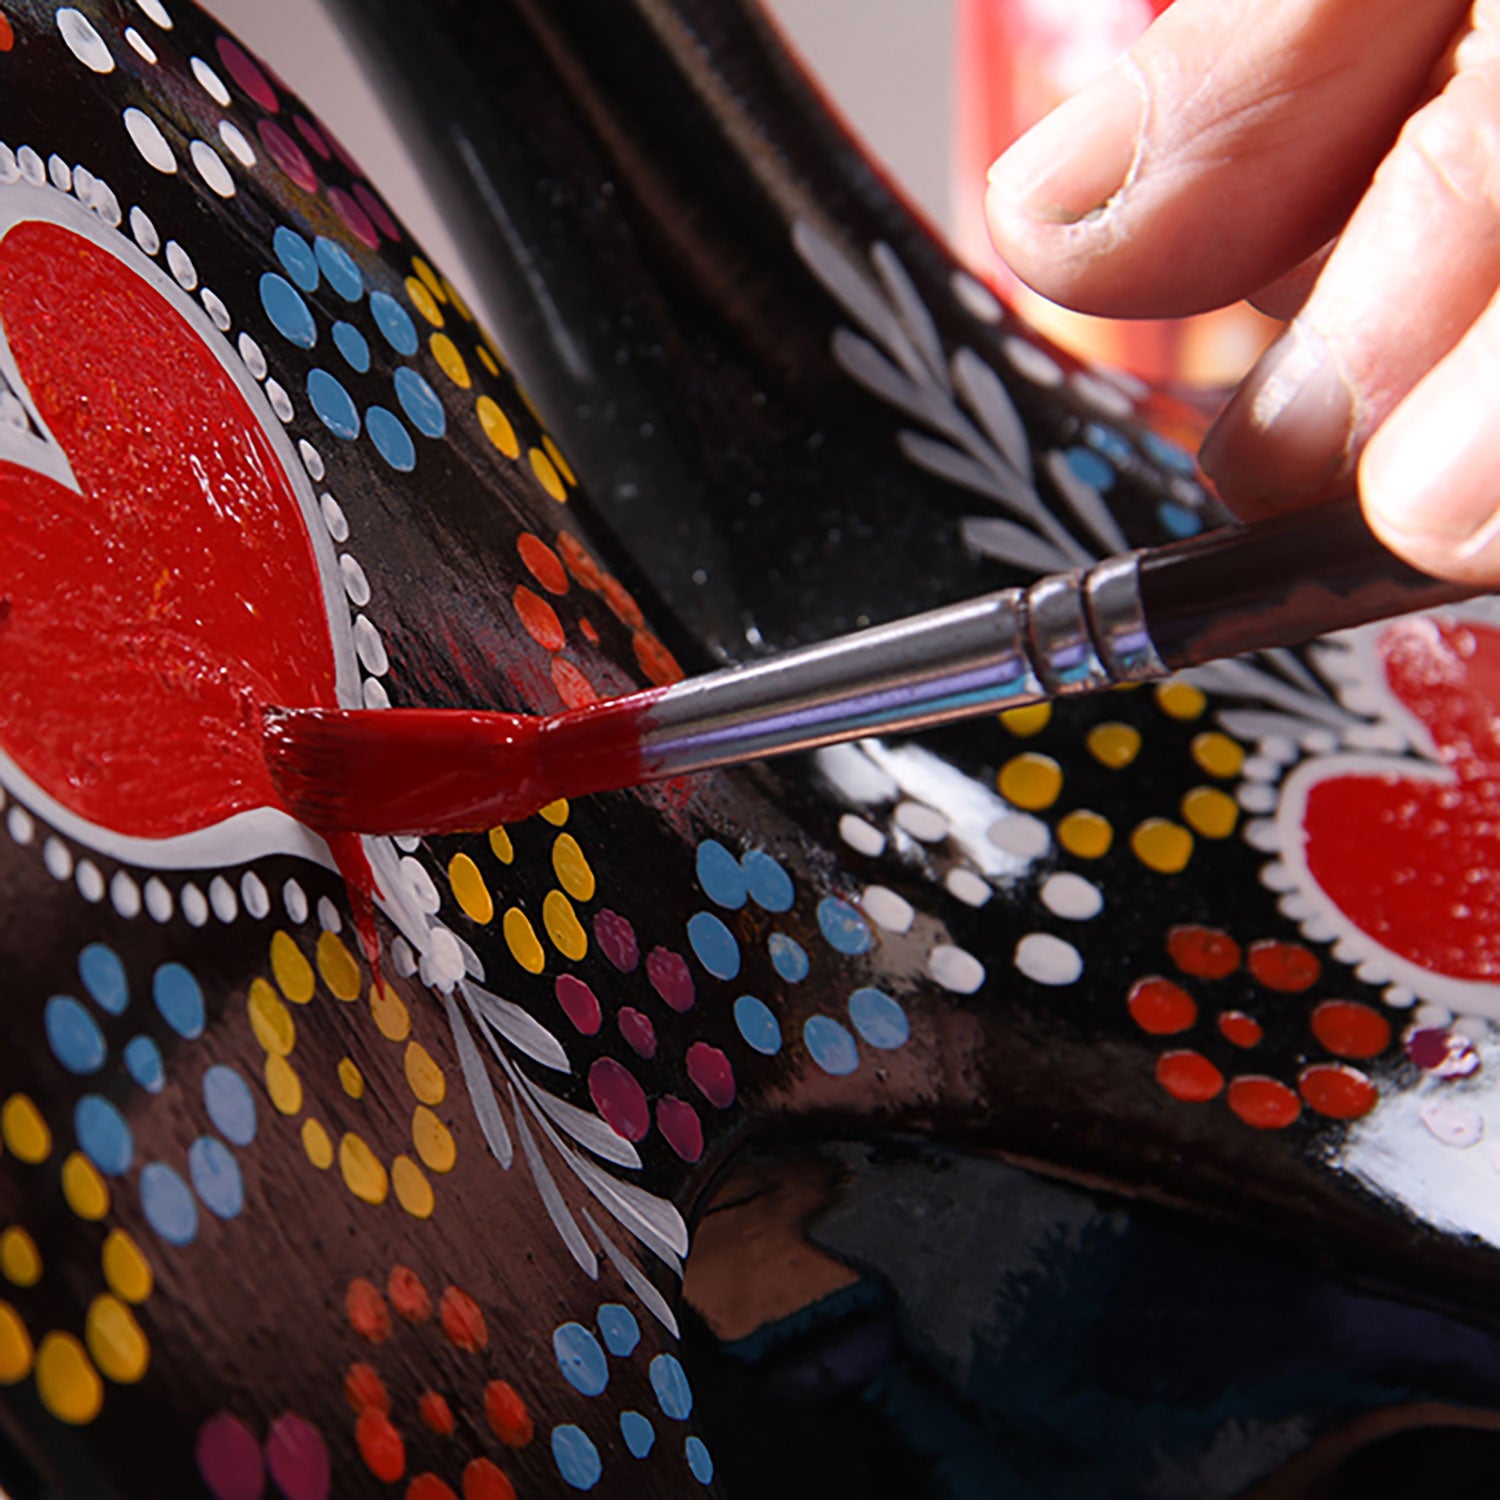 Portuguese artisans painting a Barcelos Rooster by hand.